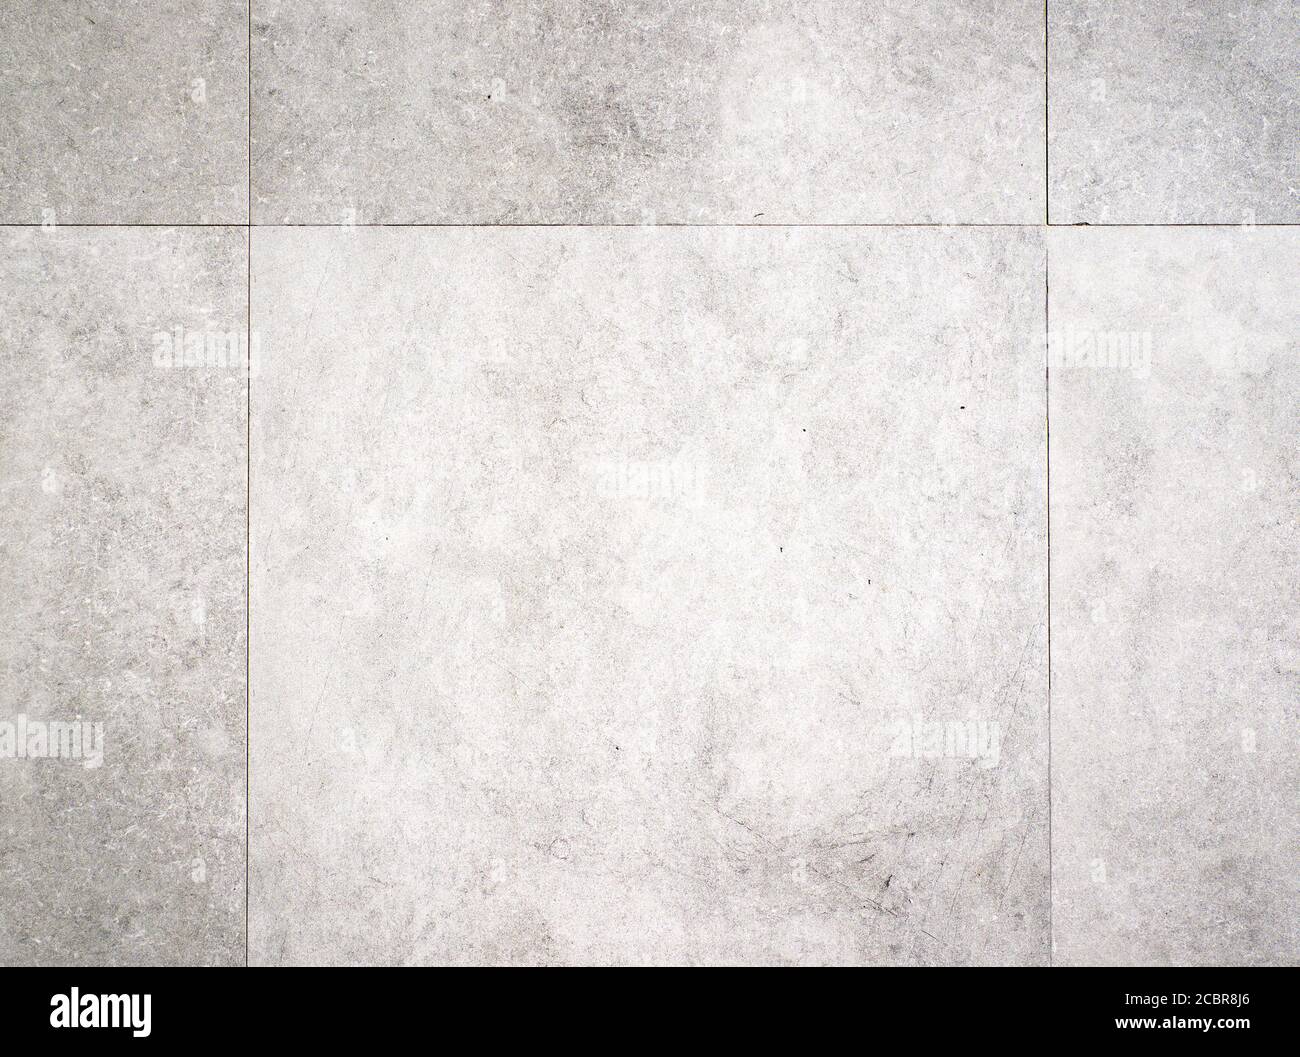 Light grey background texture of a concrete tile floor surface Stock Photo